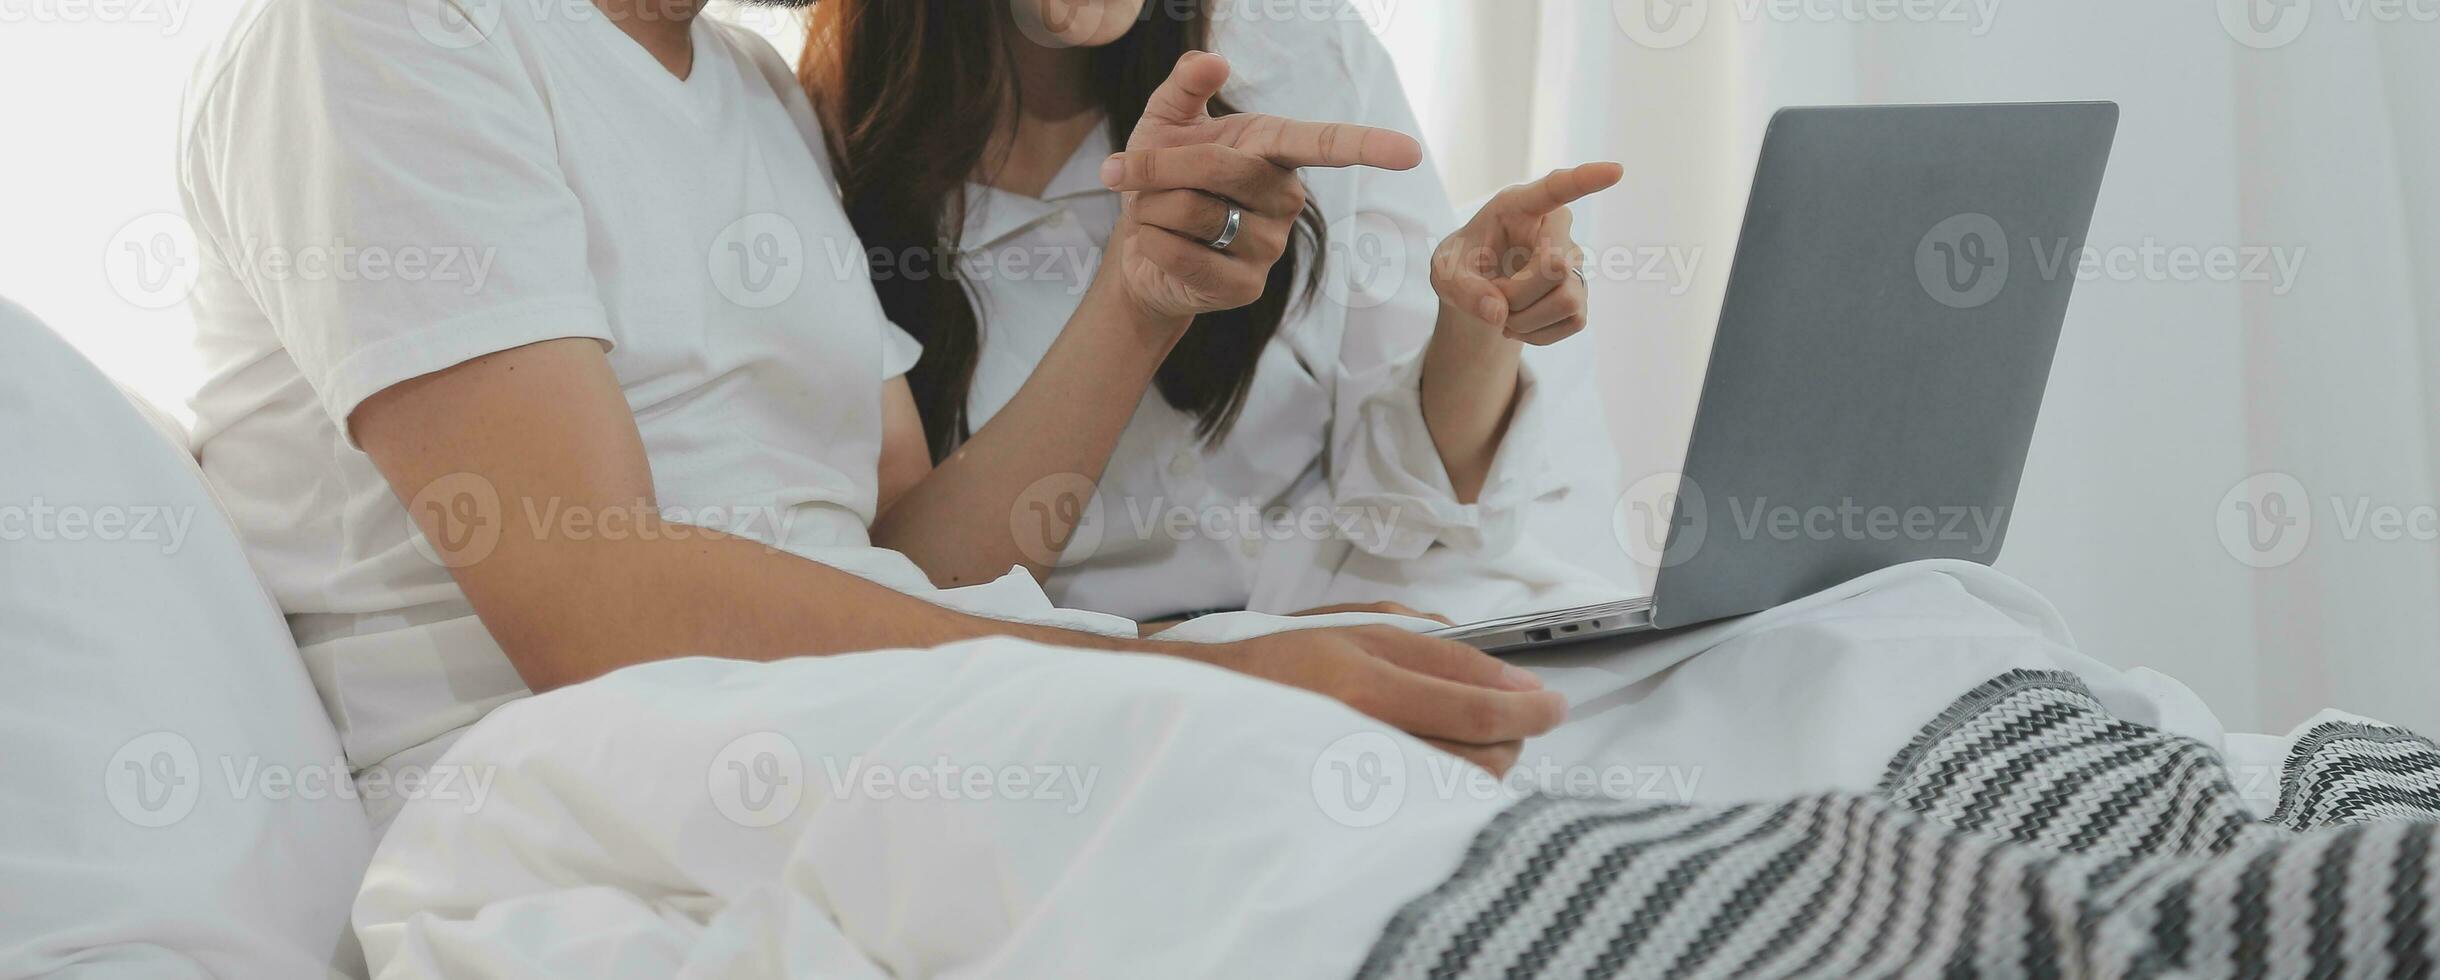 Portrait of young happy couple using laptop at night, using modern technology having fun with glowing screen in dark office or at home, startup business meeting video call distance of young business photo